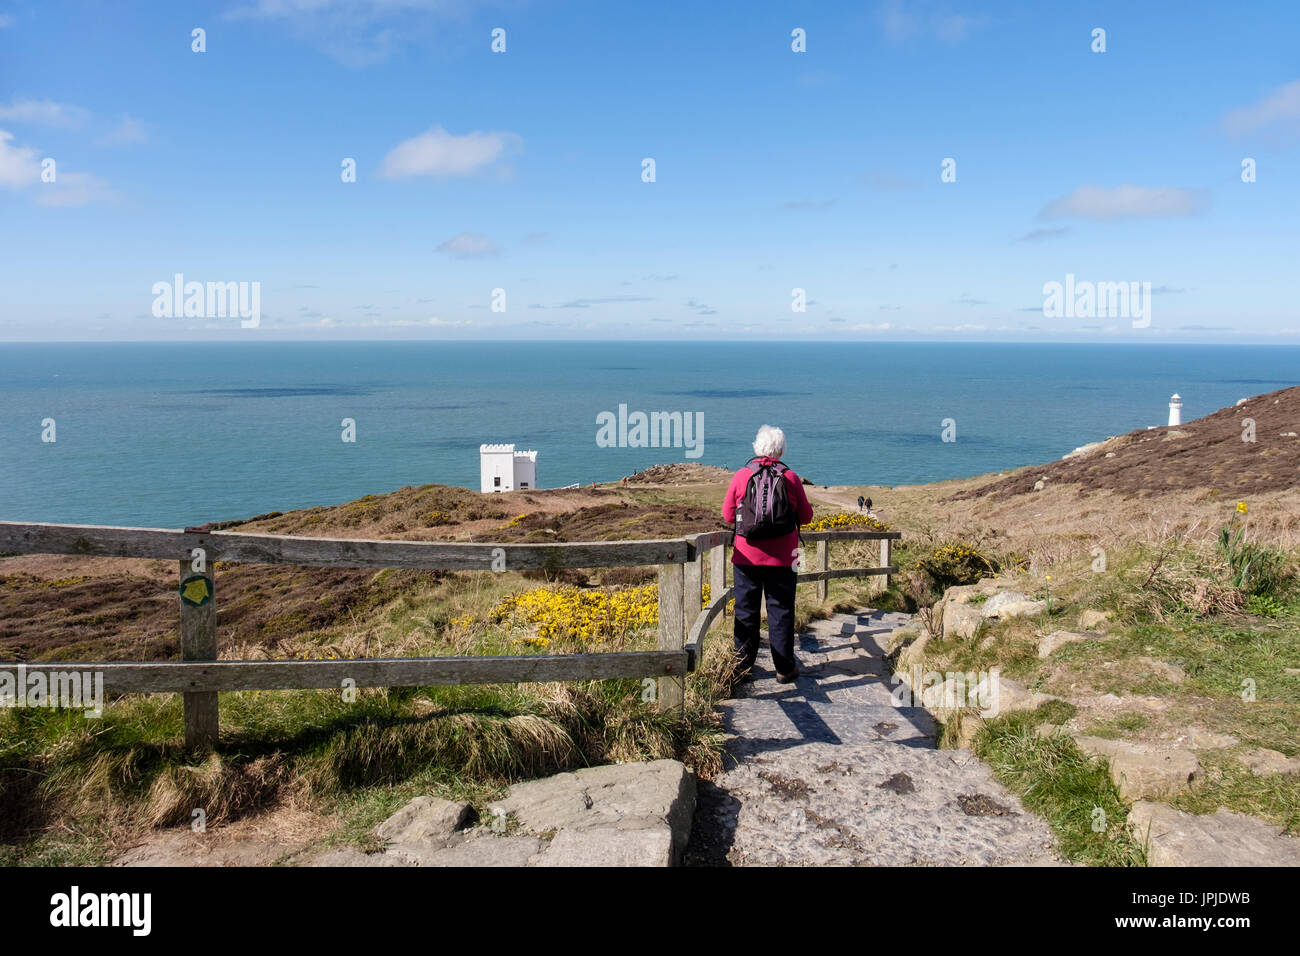 Senior walker on steps down to Ellin's Tower RSPB Visitor Centre on coast at South Stack, Holyhead, Holy Island, Isle of Anglesey (Ynys Mon) Wales UK Stock Photo